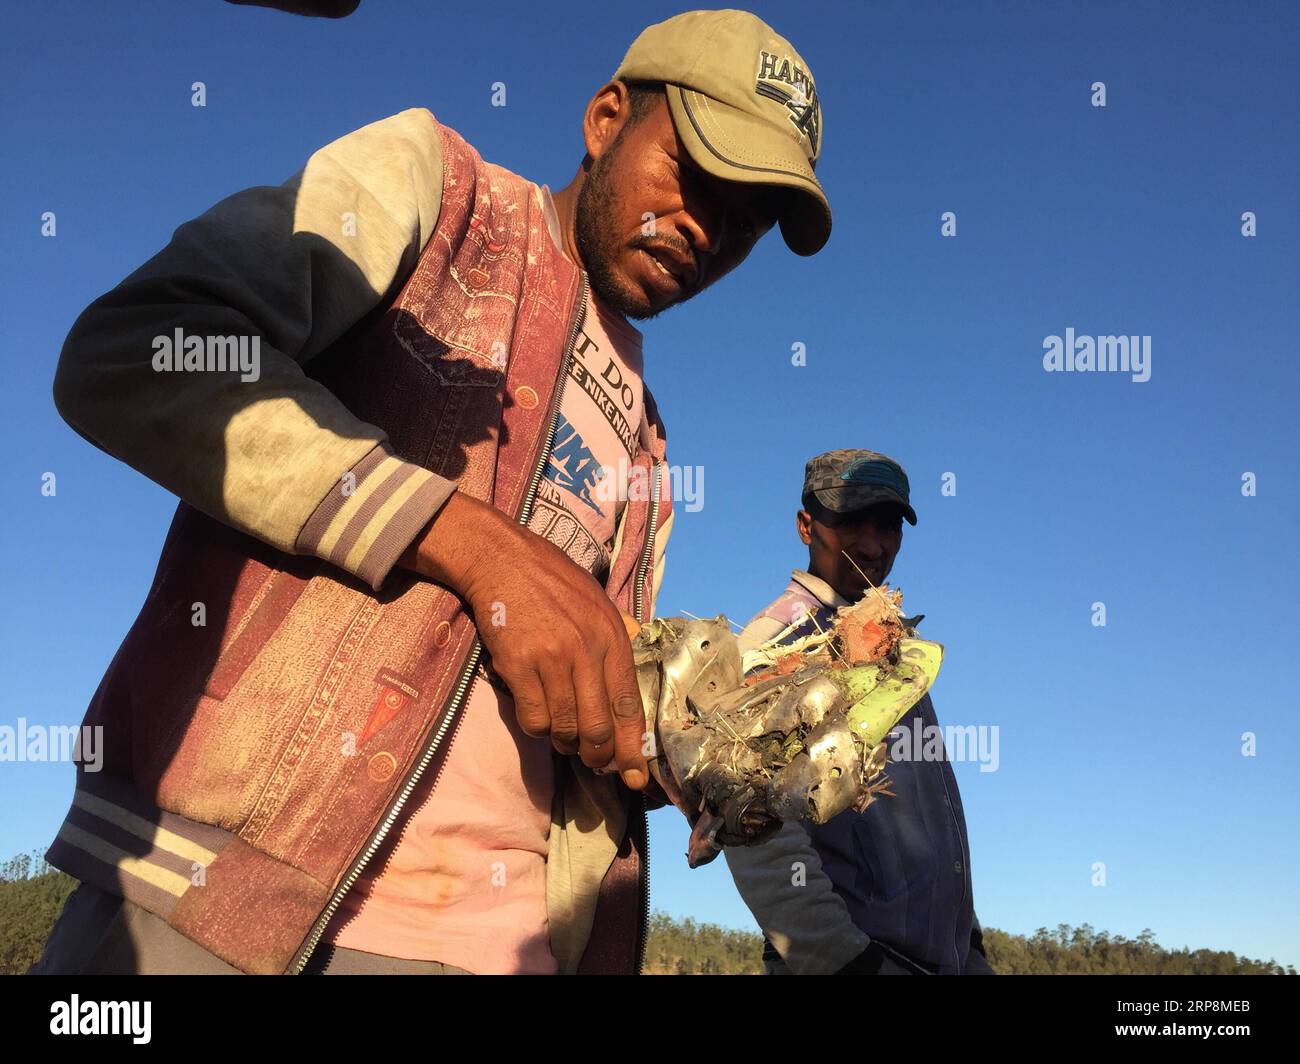 (190311) -- ADDIS ABABA, March 11, 2019 (Xinhua) -- Photo taken with a mobile phone shows local people looking for wreckage of an Ethiopian Airlines aircraft at the crash site near Bishoftu town, about 45 km from the capital Addis Ababa, Ethiopia. The Nairobi-bound Boeing 737-8 MAX crashed on Sunday, just minutes from takeoff from Addis Ababa Bole International Airport, killing all 157 people aboard. Earlier on Monday, Ethiopian Airlines announced its decision to suspend commercial operations of all Boeing 737-Max 8 aircraft. (Xinhua/Michael Tewelde) ETHIOPIA-BISHOFTU-ETHIOPIAN AIRLINES-JET CR Stock Photo